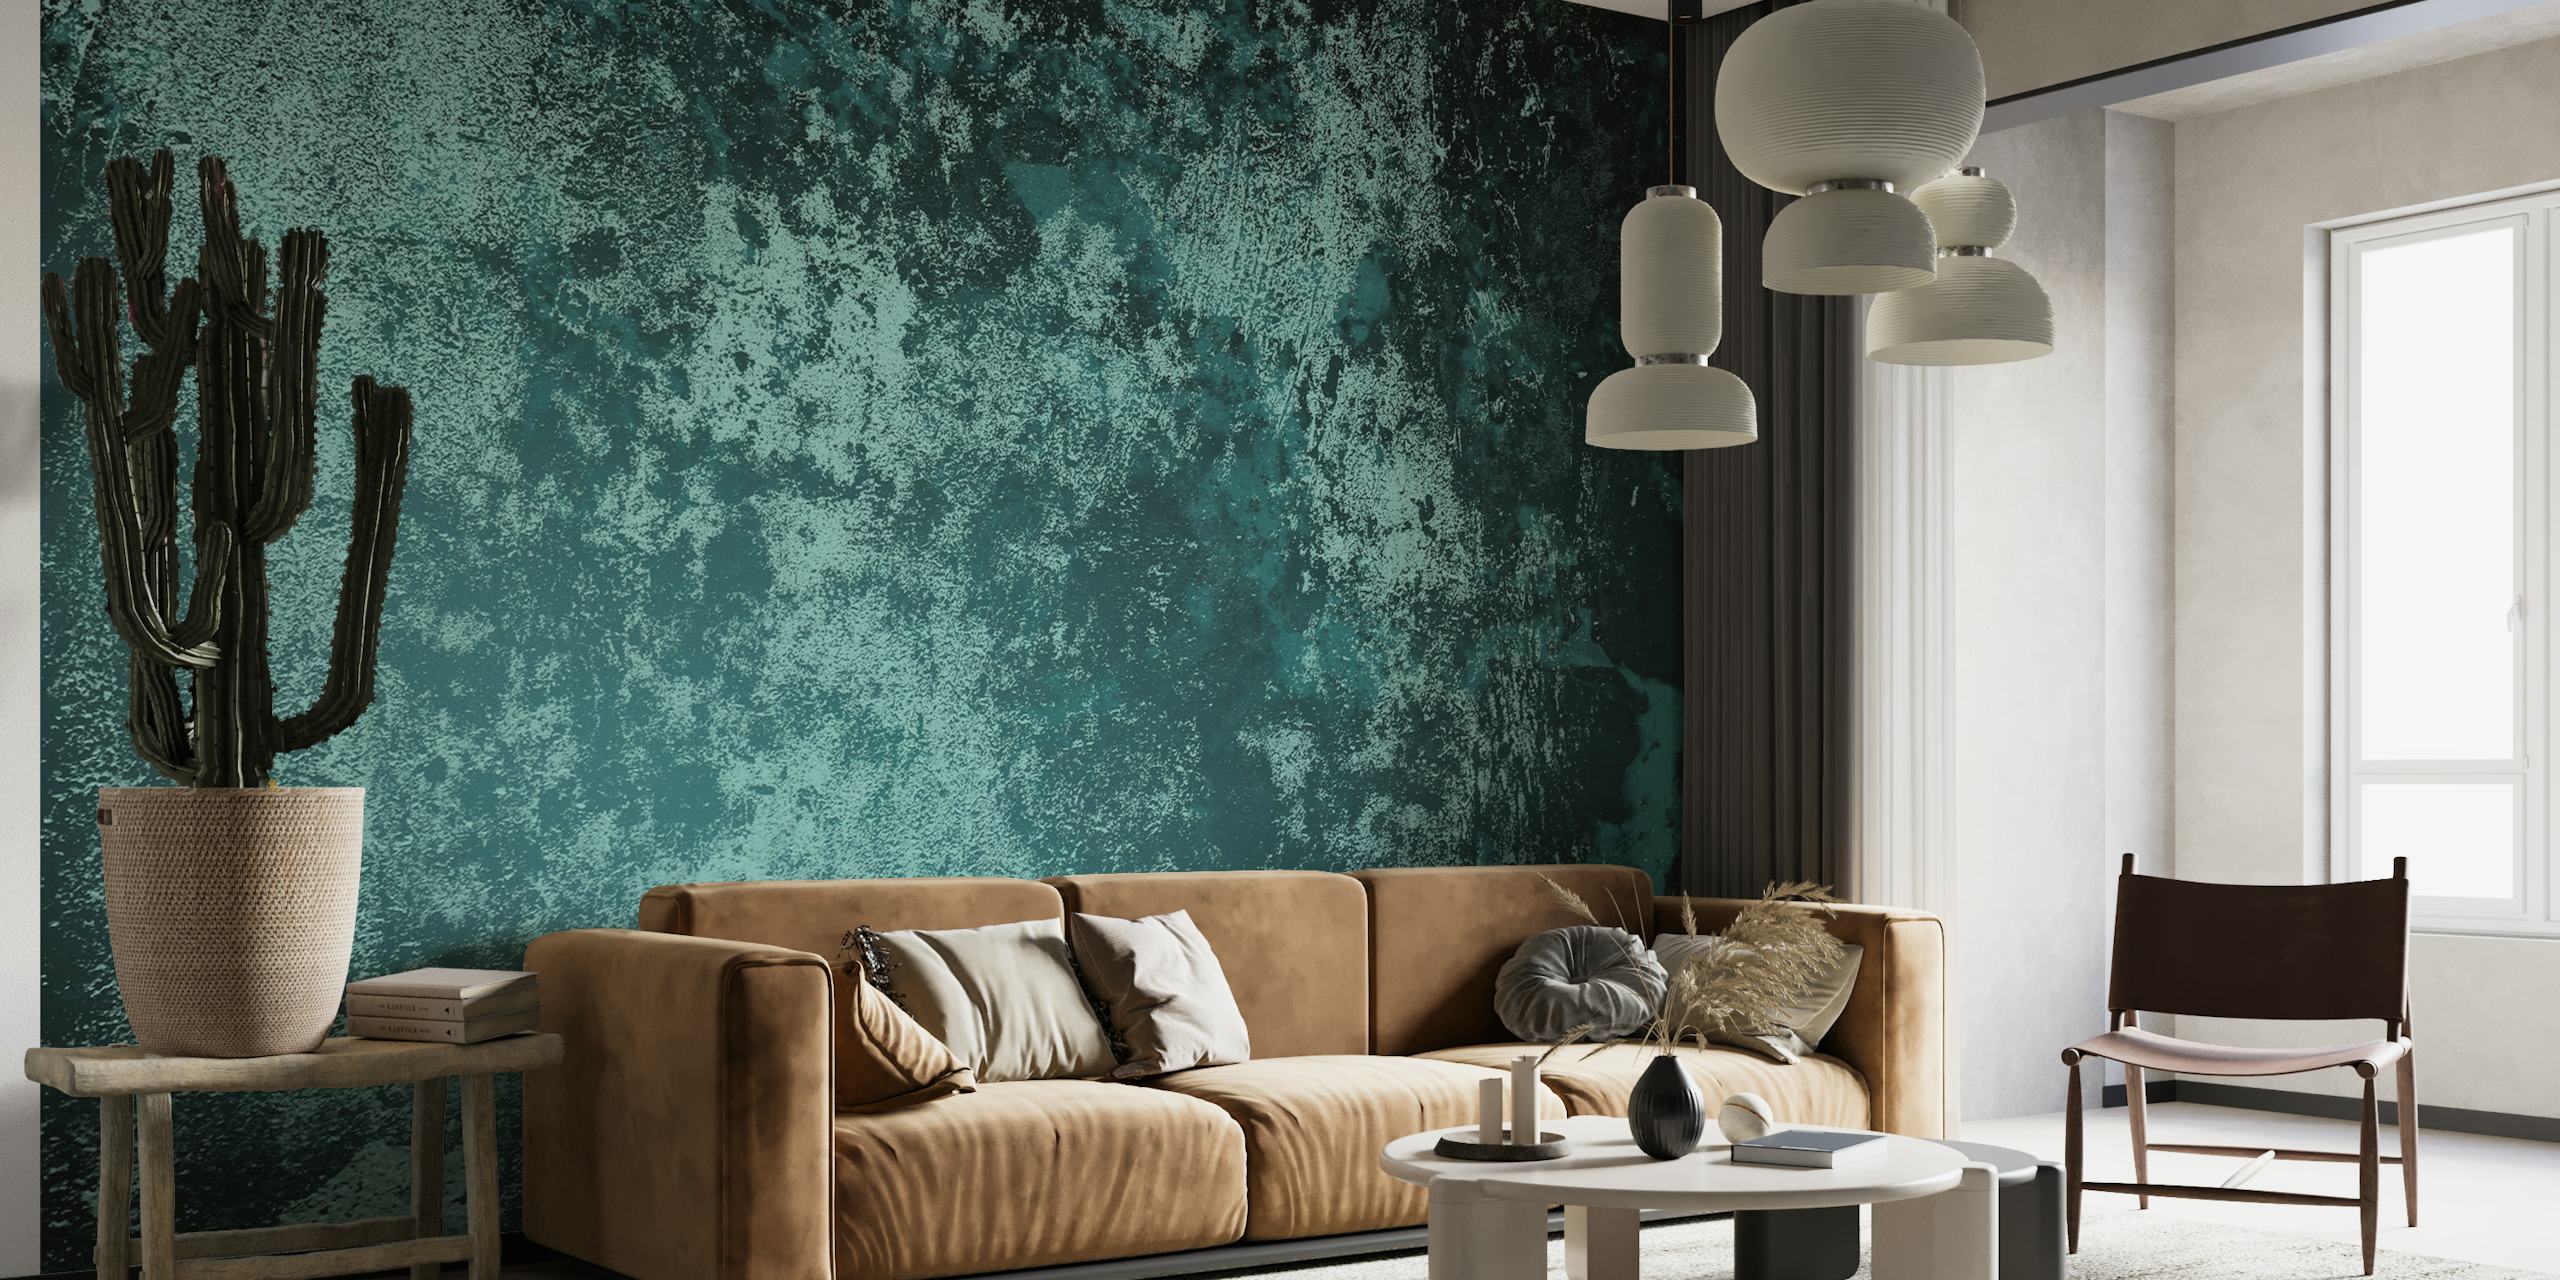 Concrete texture in teal blue wallpaper